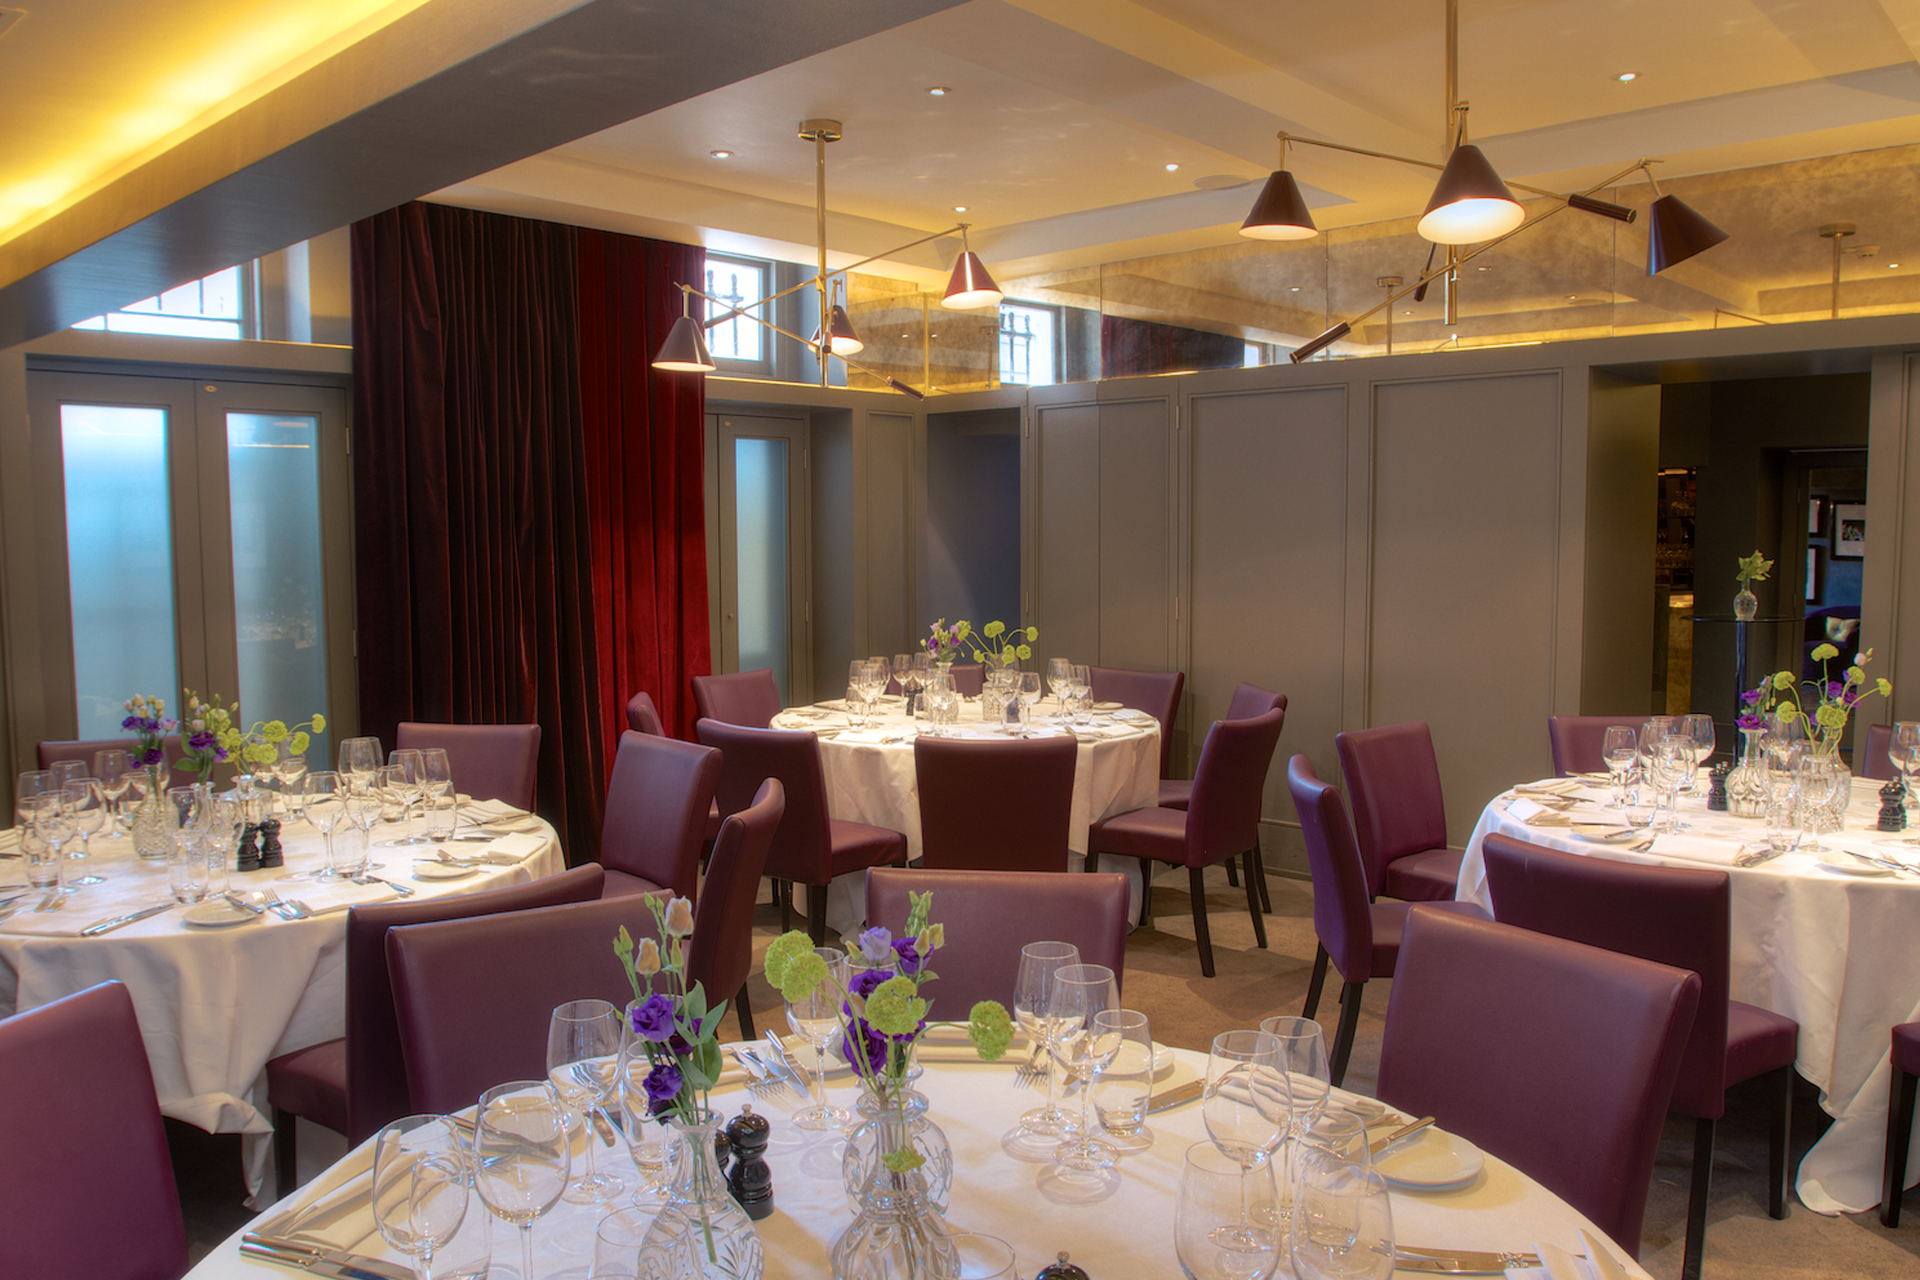 Smaller tables for private dining